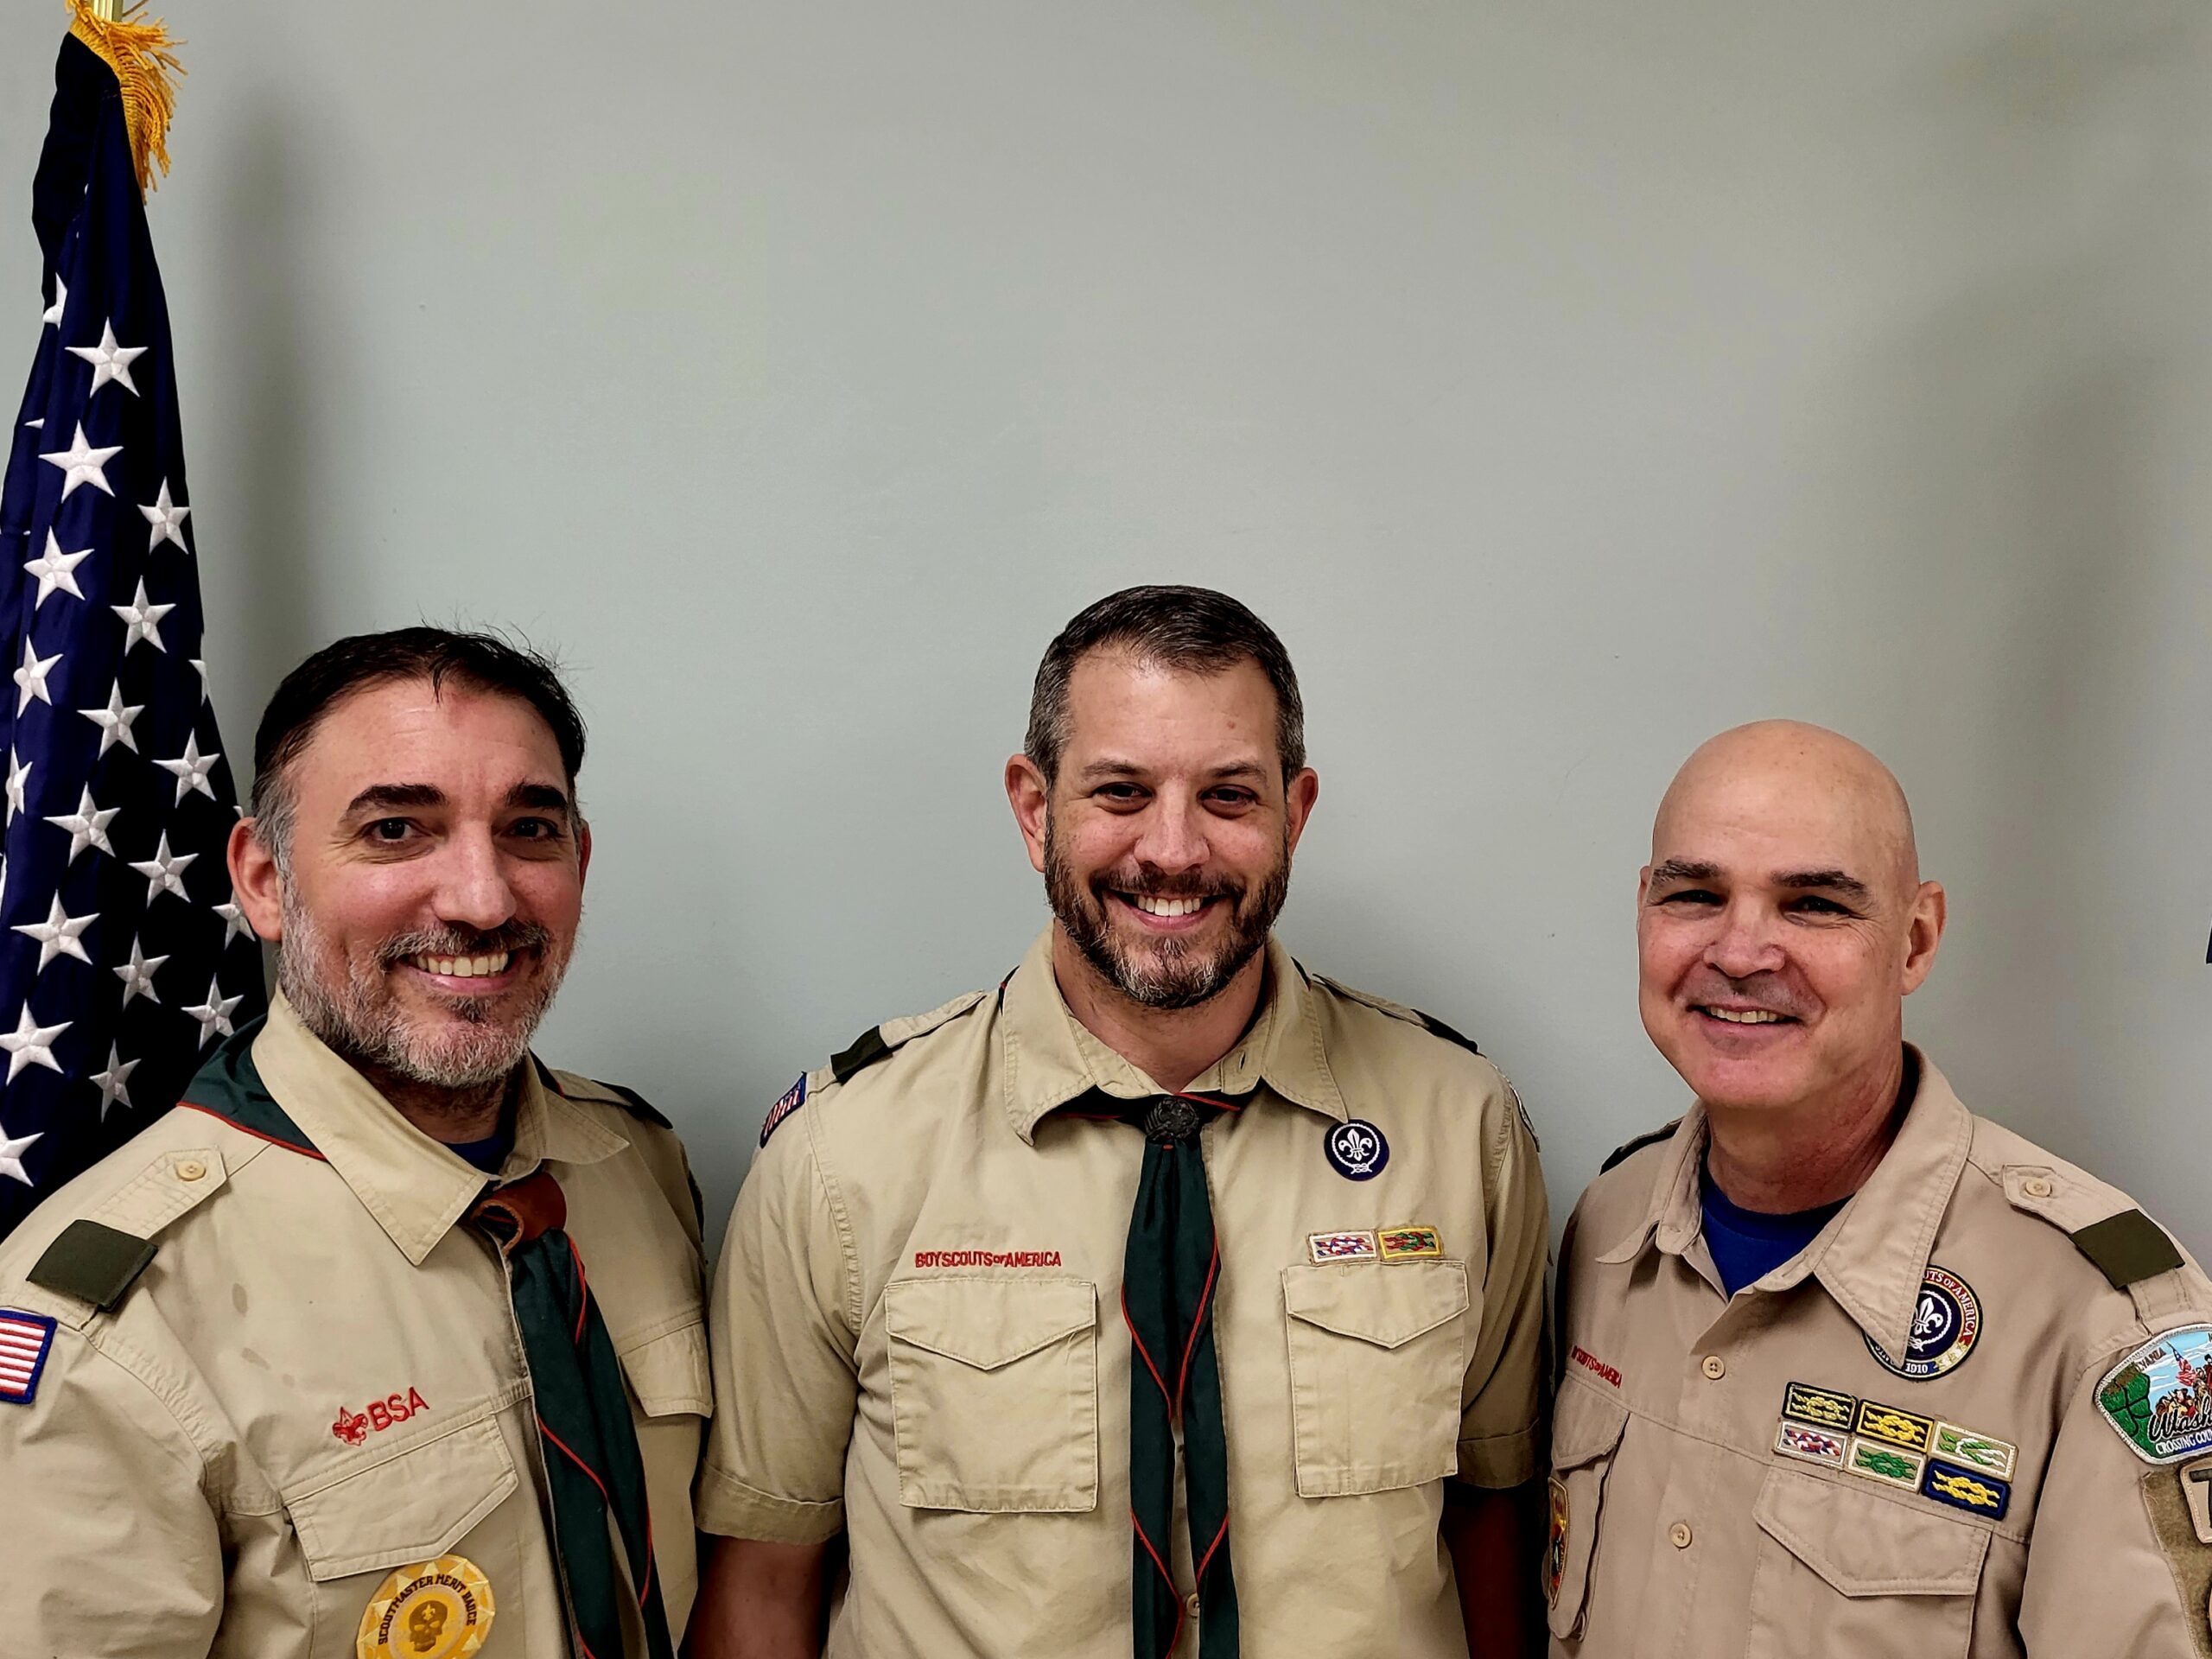 Scouters in Action: They saved the drowning man from the rip current!